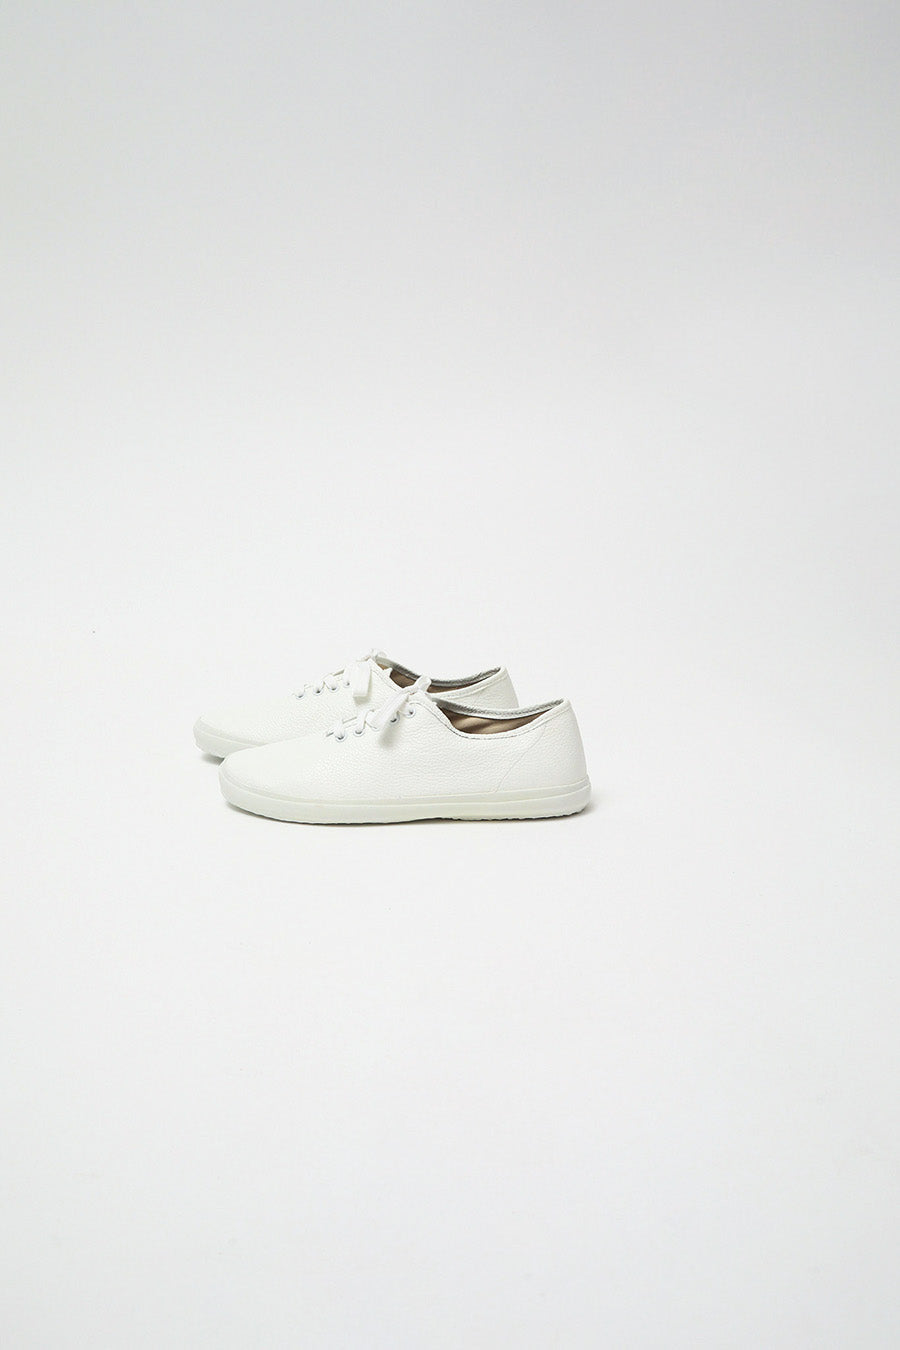 Reproduction of Found 4600 Trainer in White